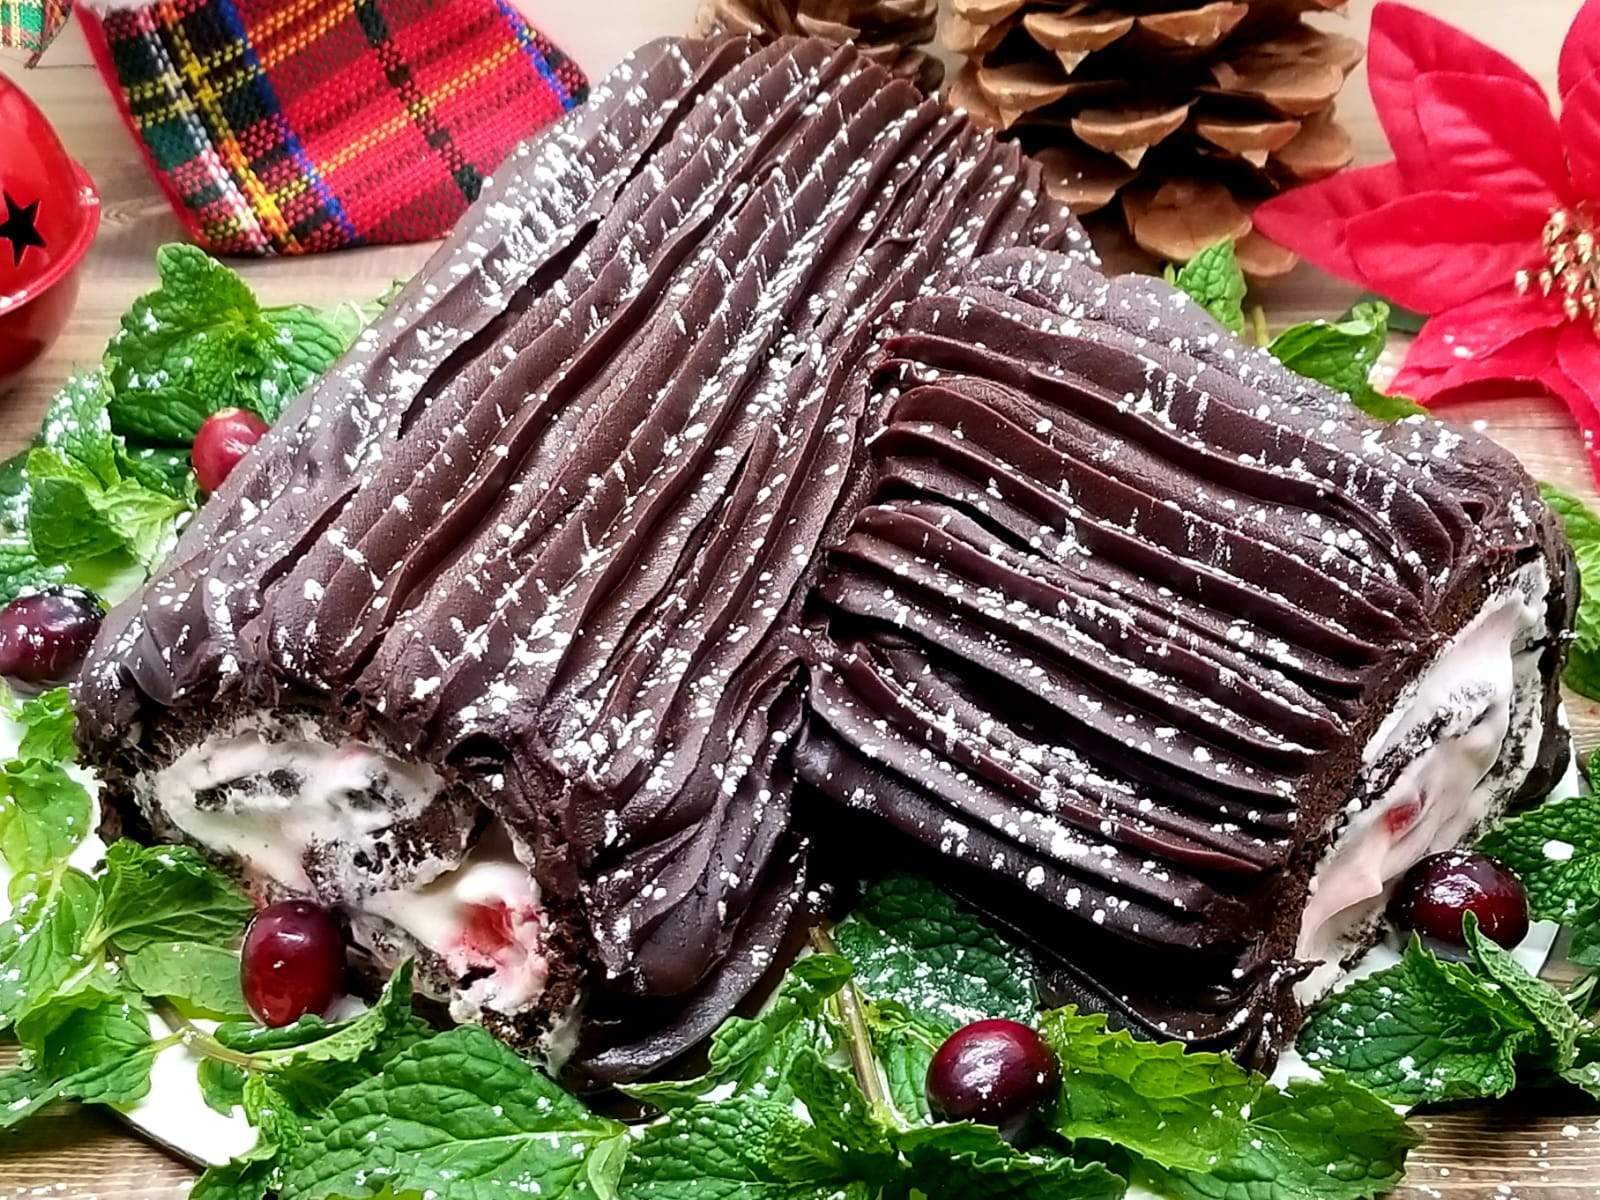 The Yule log cake tradition